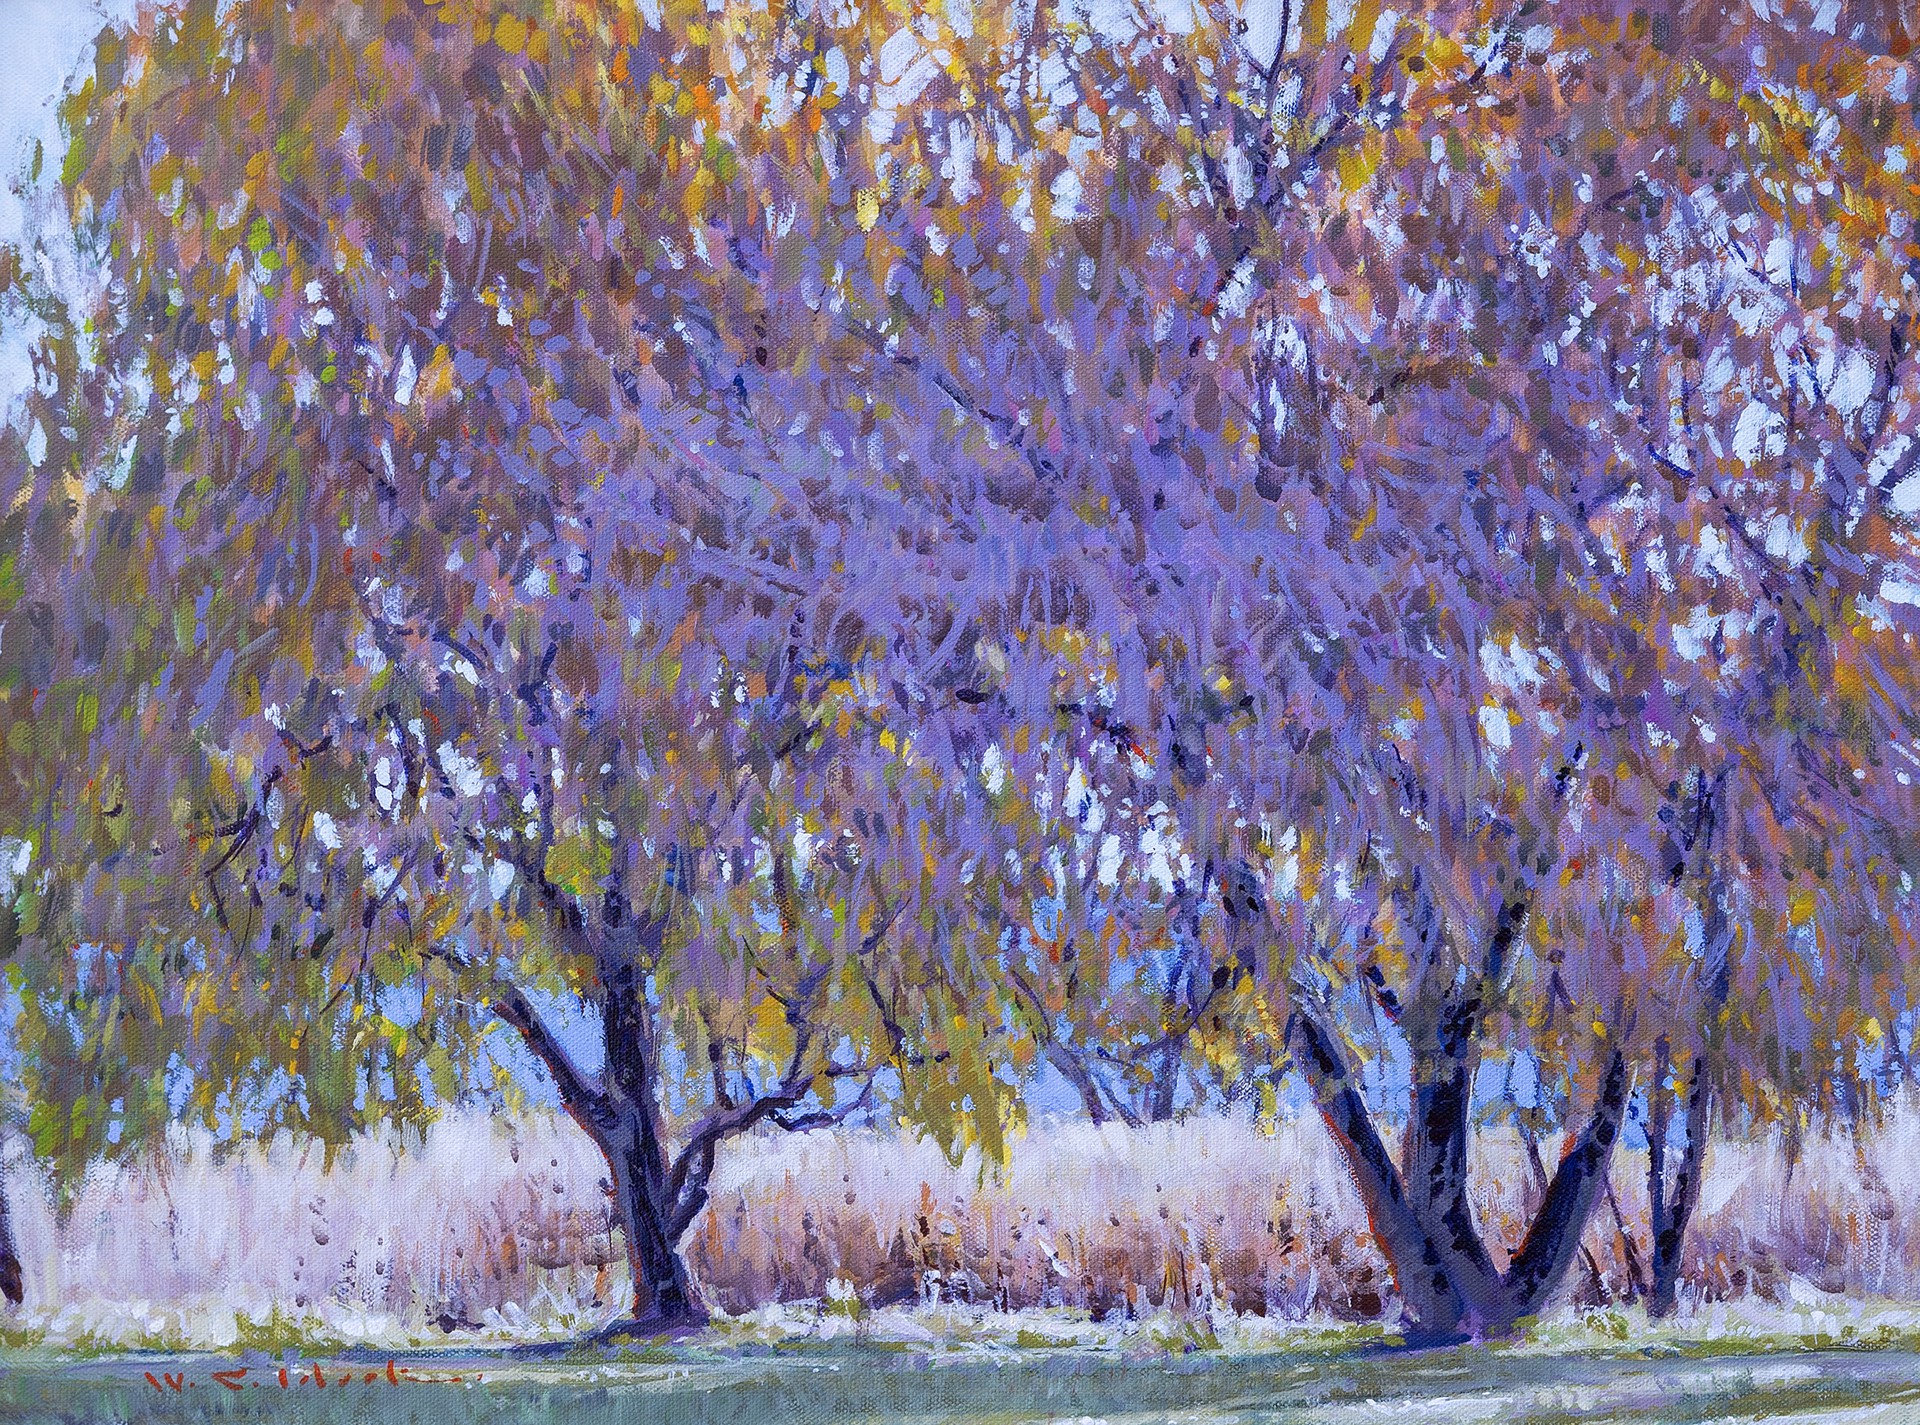 November Orchard by William C. Hook